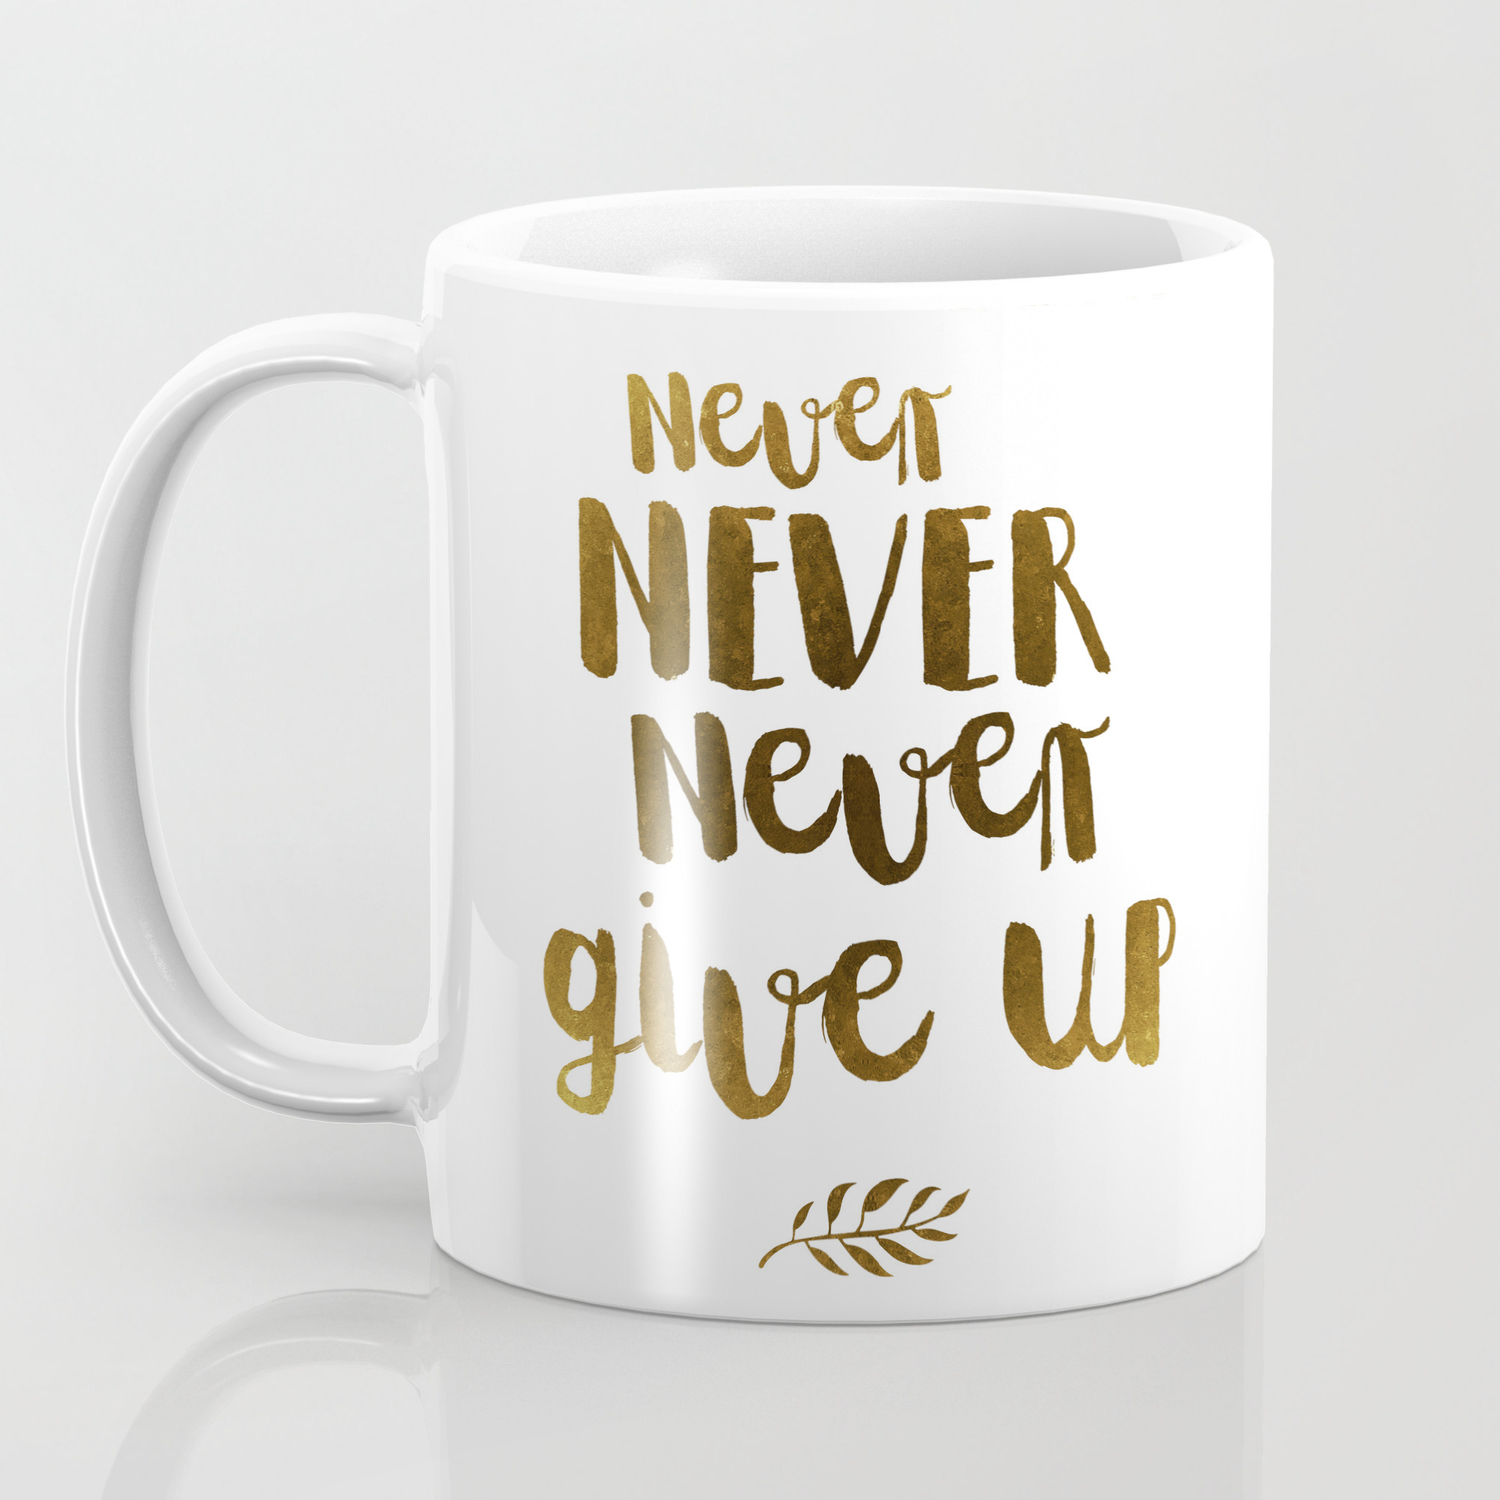 Details about   No Excuses Motivational Inspirational Never Give Up Gift Mug